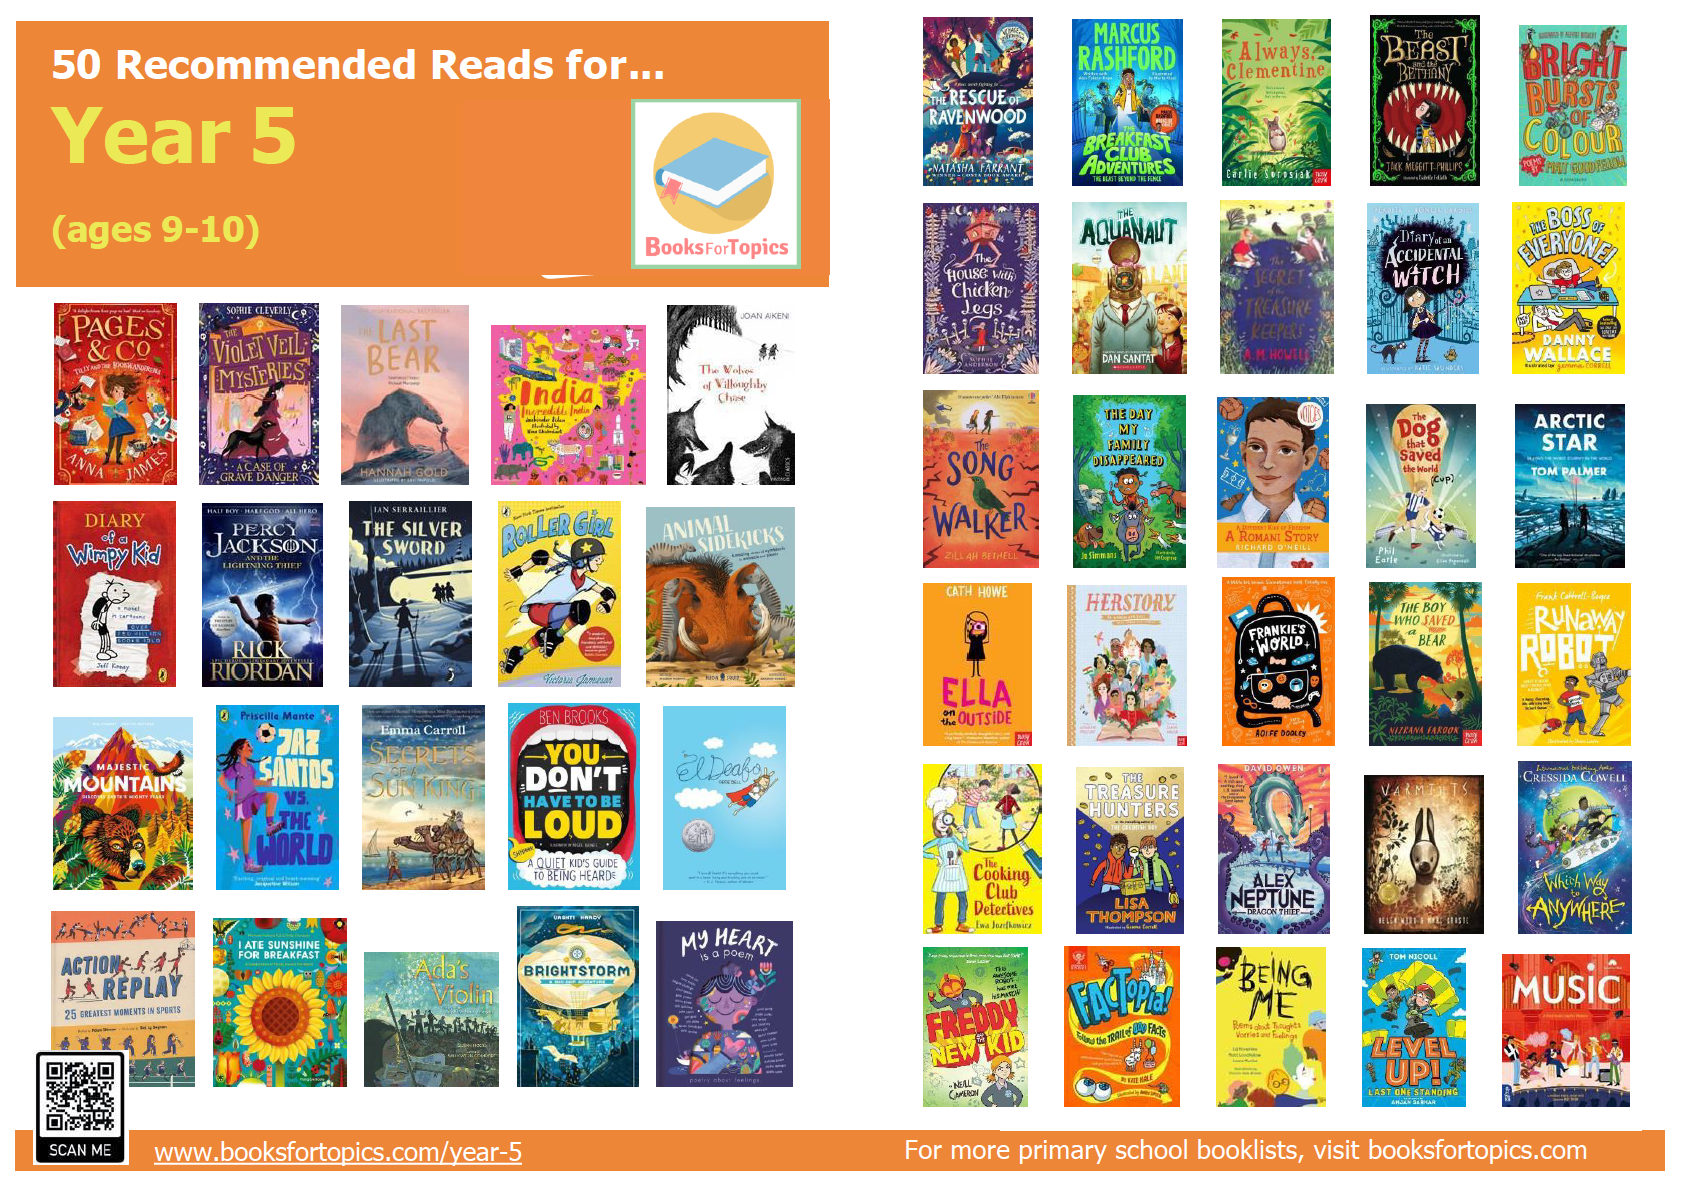 y5 recommended reading list poster